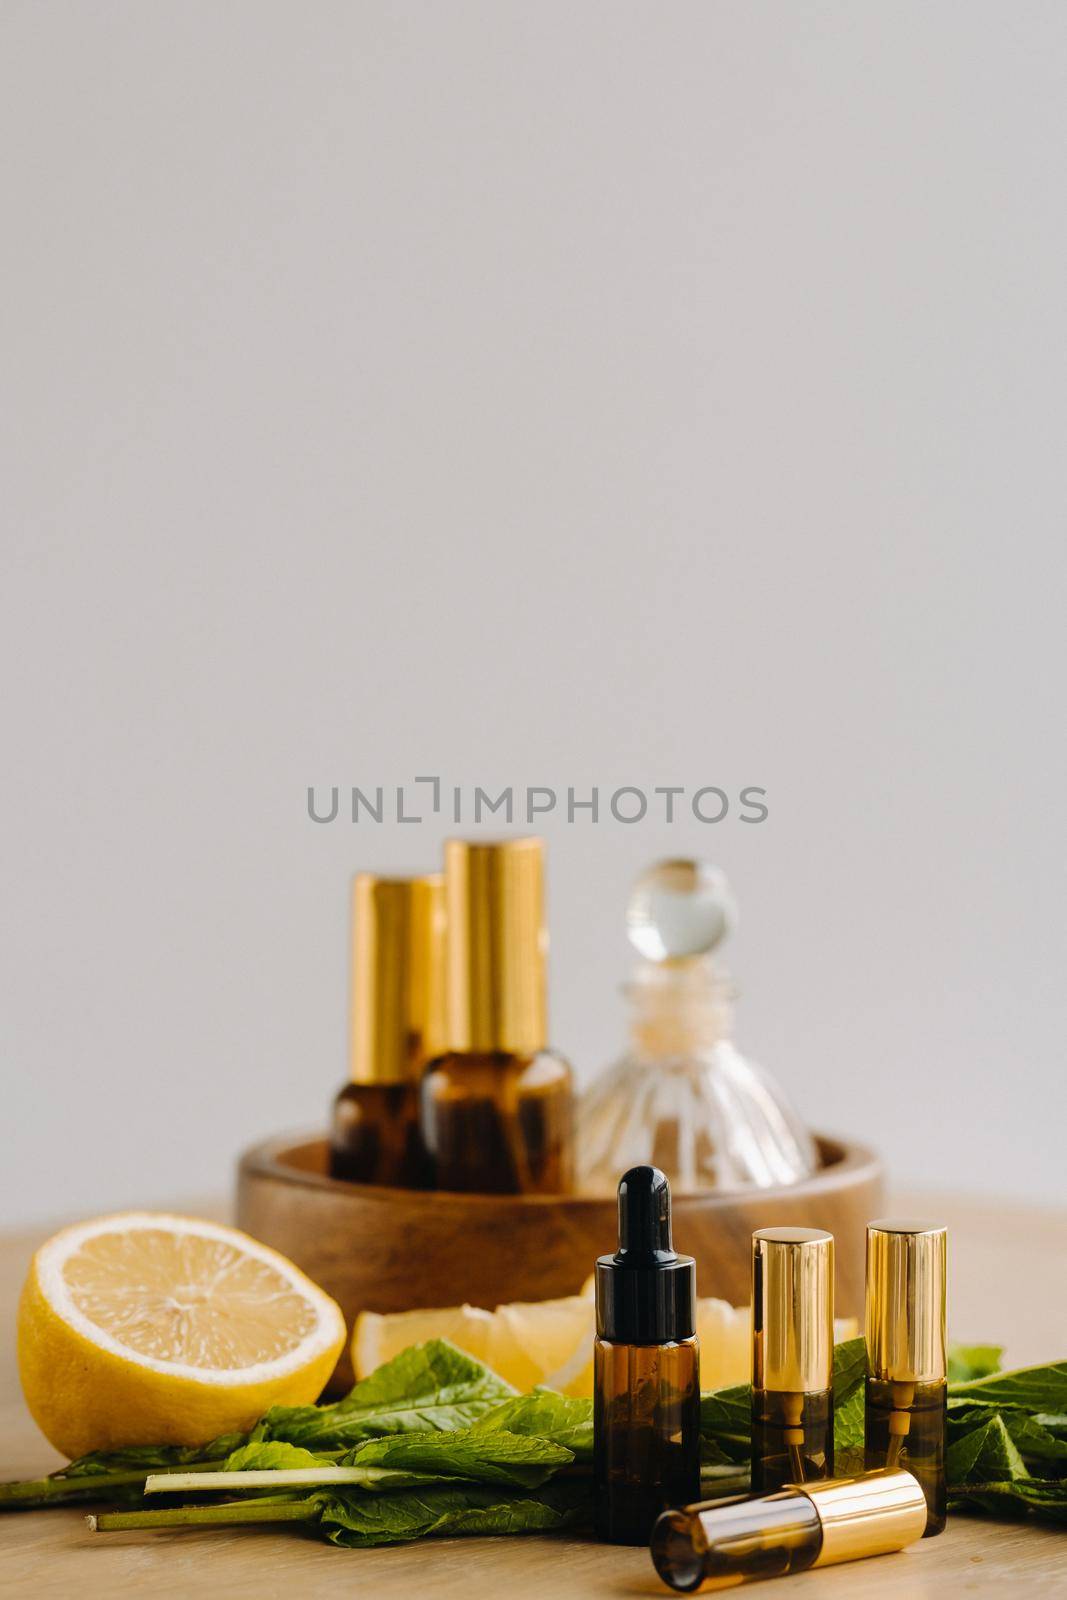 Essential oil in bottles with lemon and mint fragrance lying on a wooden surface.